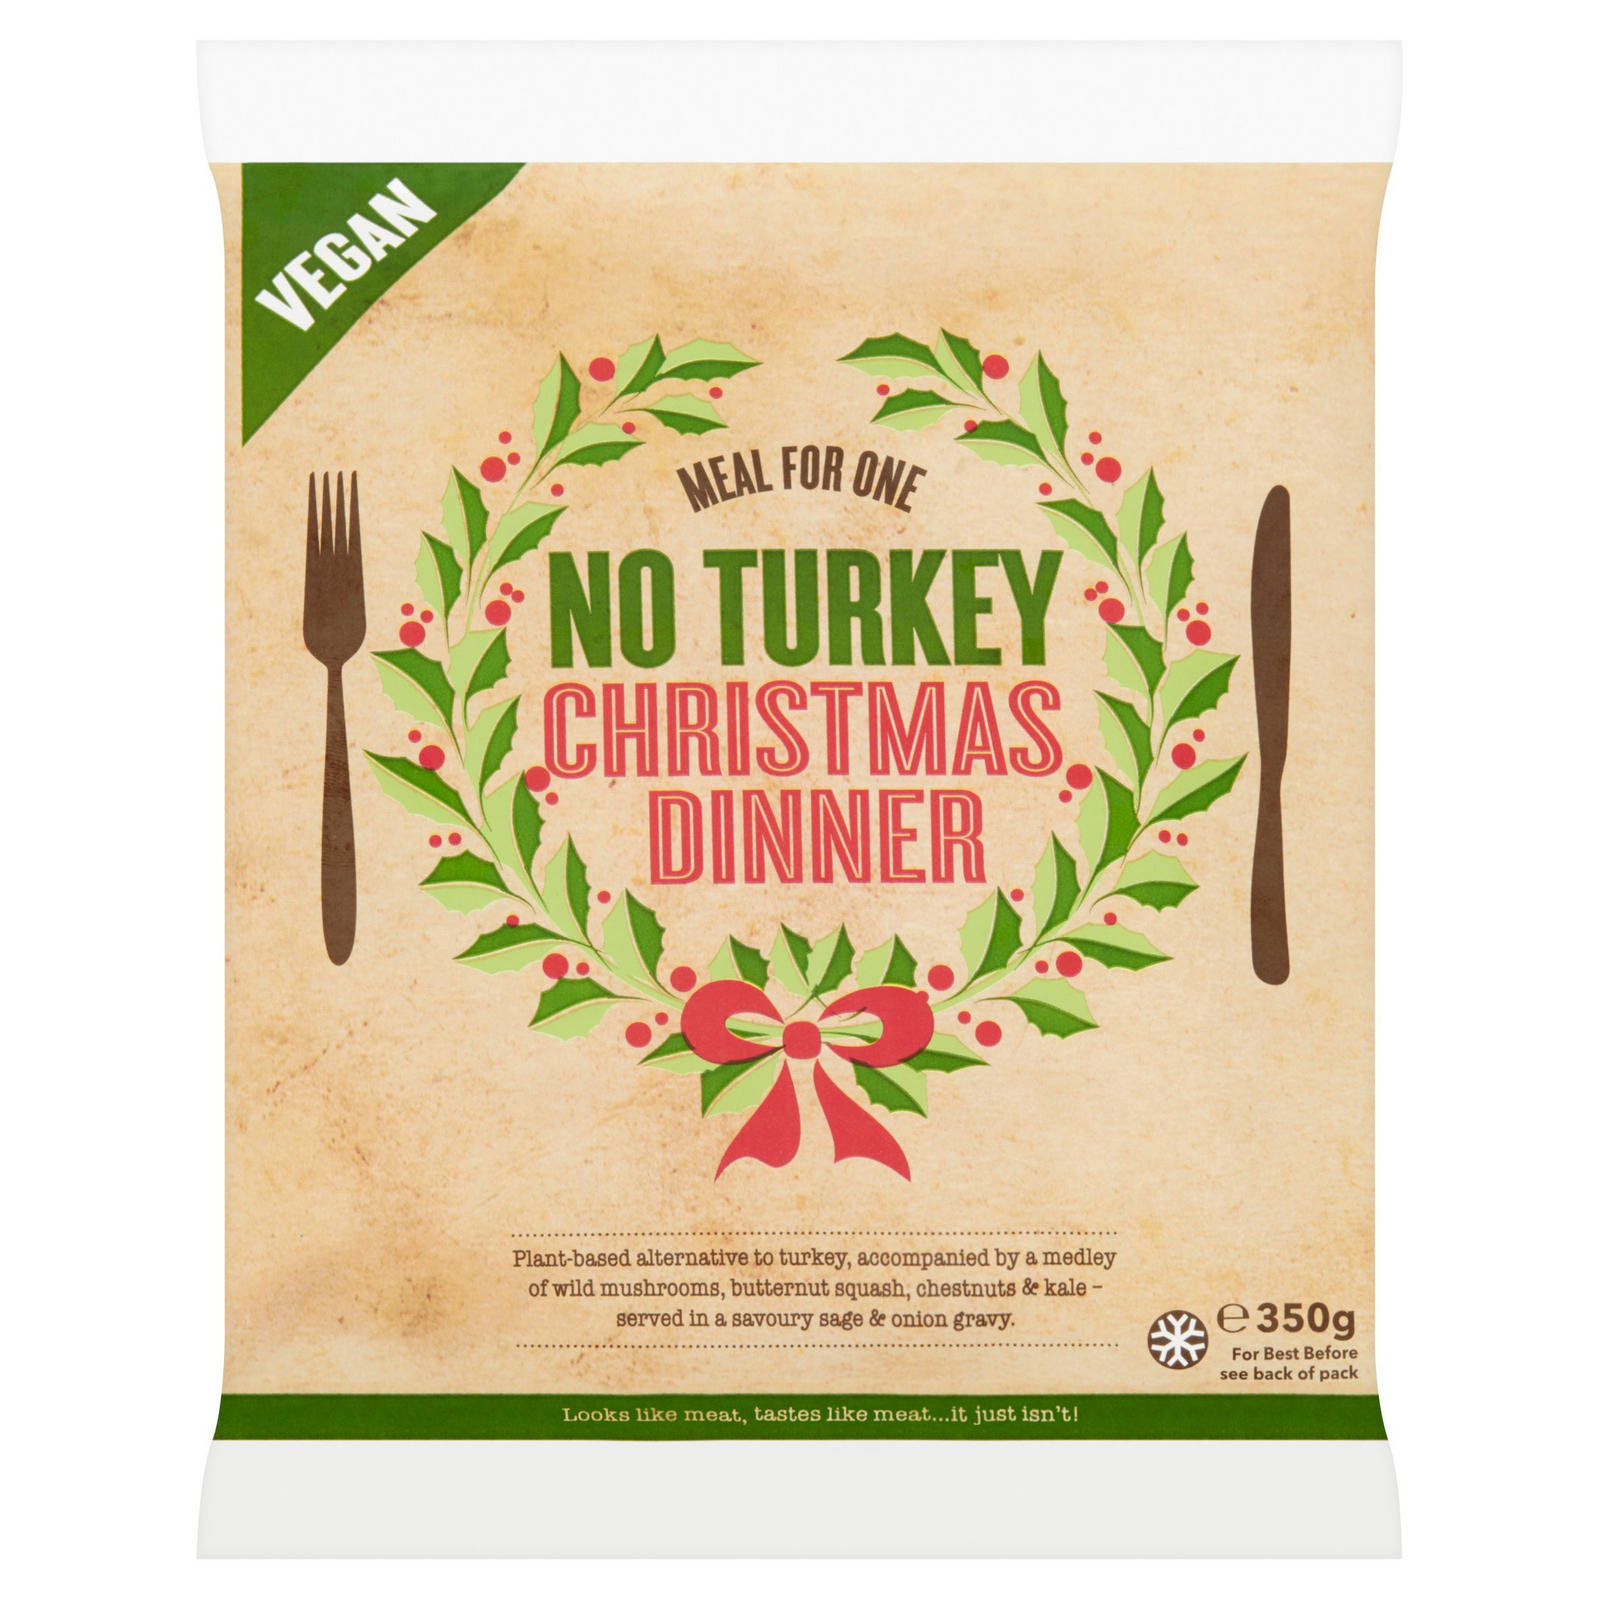 No Turkey Christmas Dinner Meal for One 350g | Vegetarian | Iceland Foods